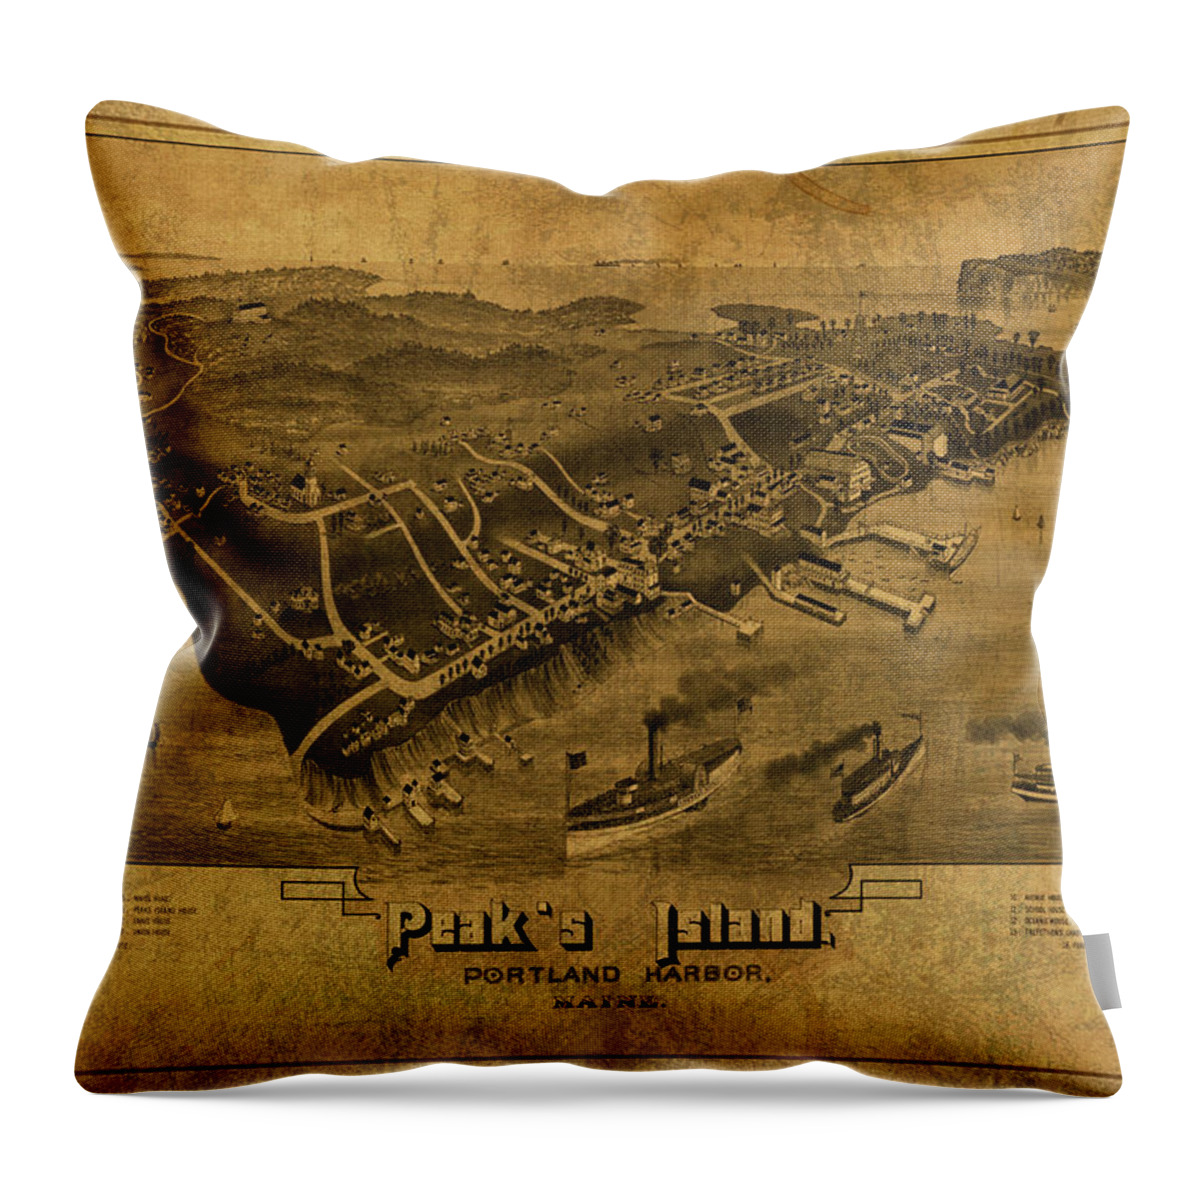 Vintage Throw Pillow featuring the mixed media Vintage Map of Peaks Island Portland Harbor Maine 1885 by Design Turnpike